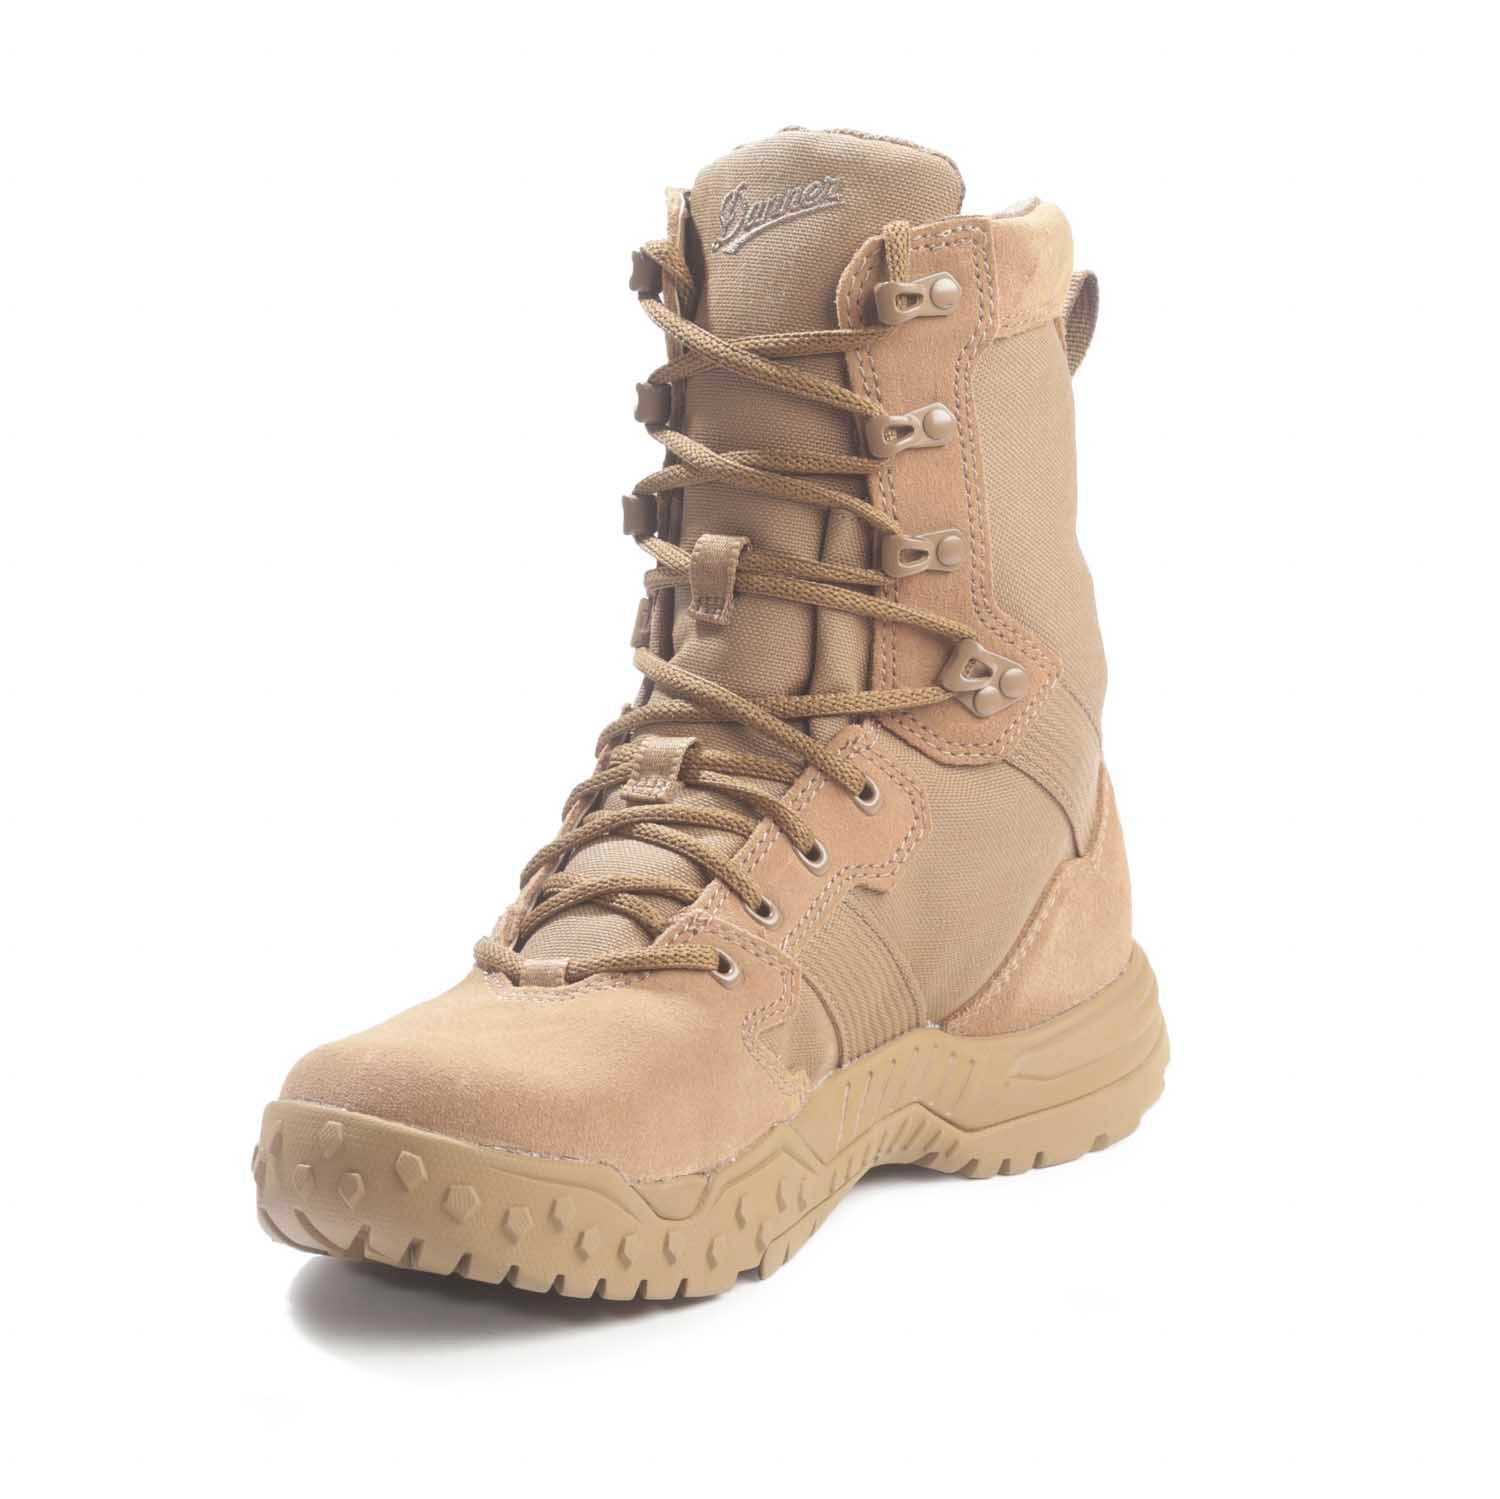 Danner Scorch Military 8